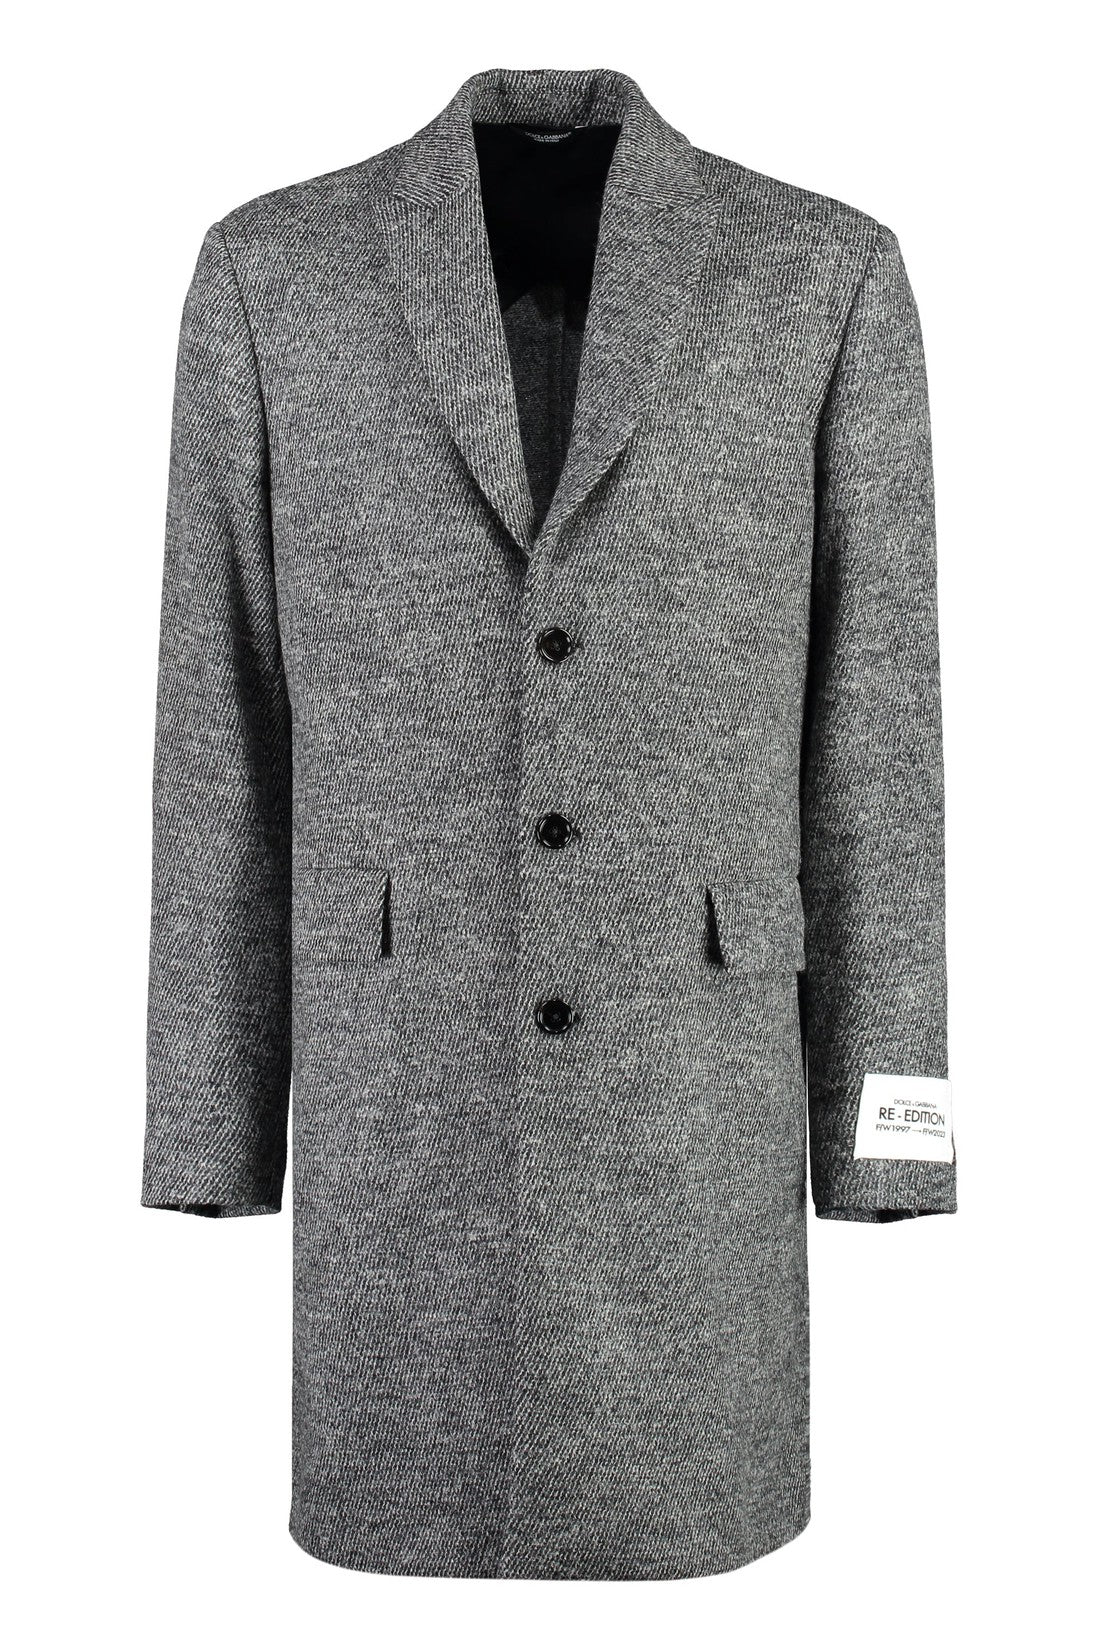 Dolce & Gabbana-OUTLET-SALE-Single-breasted wool coat-ARCHIVIST